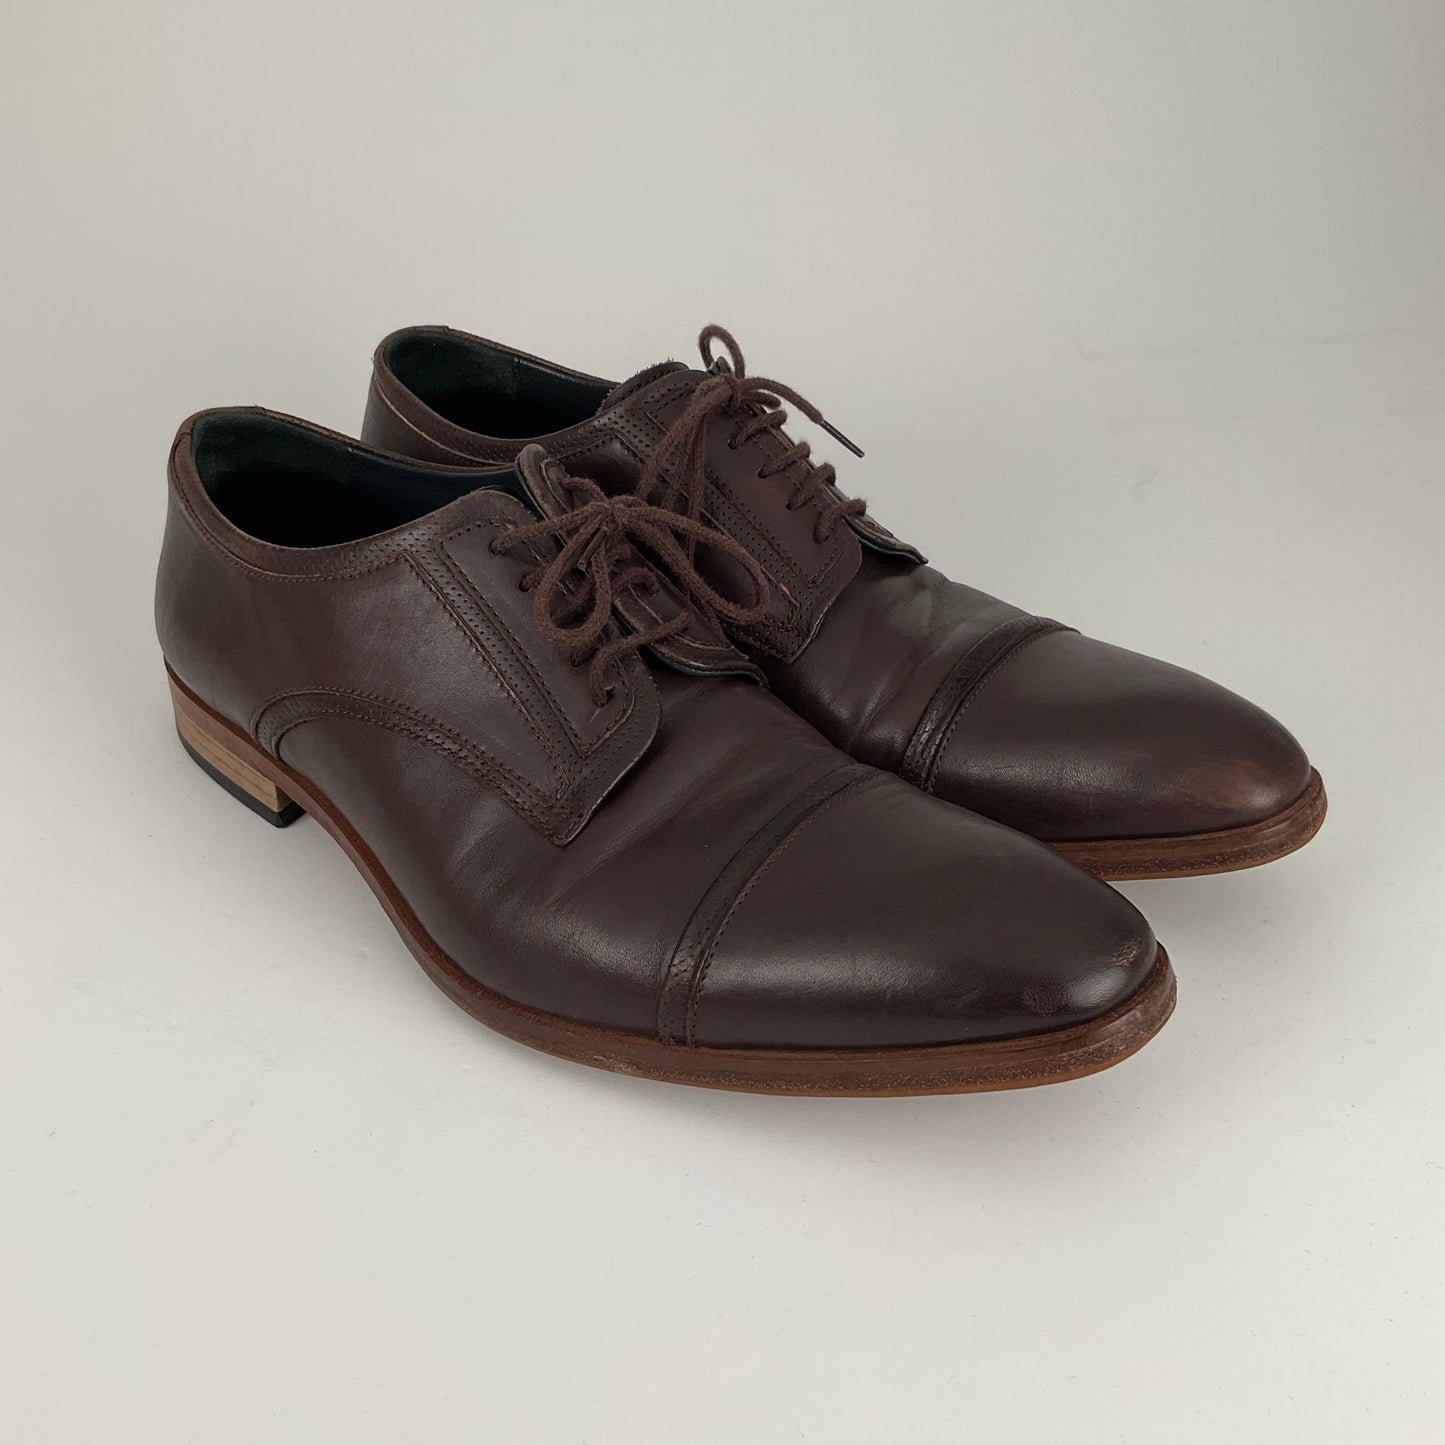 Brando - Brown Leather Shoes - Size 41